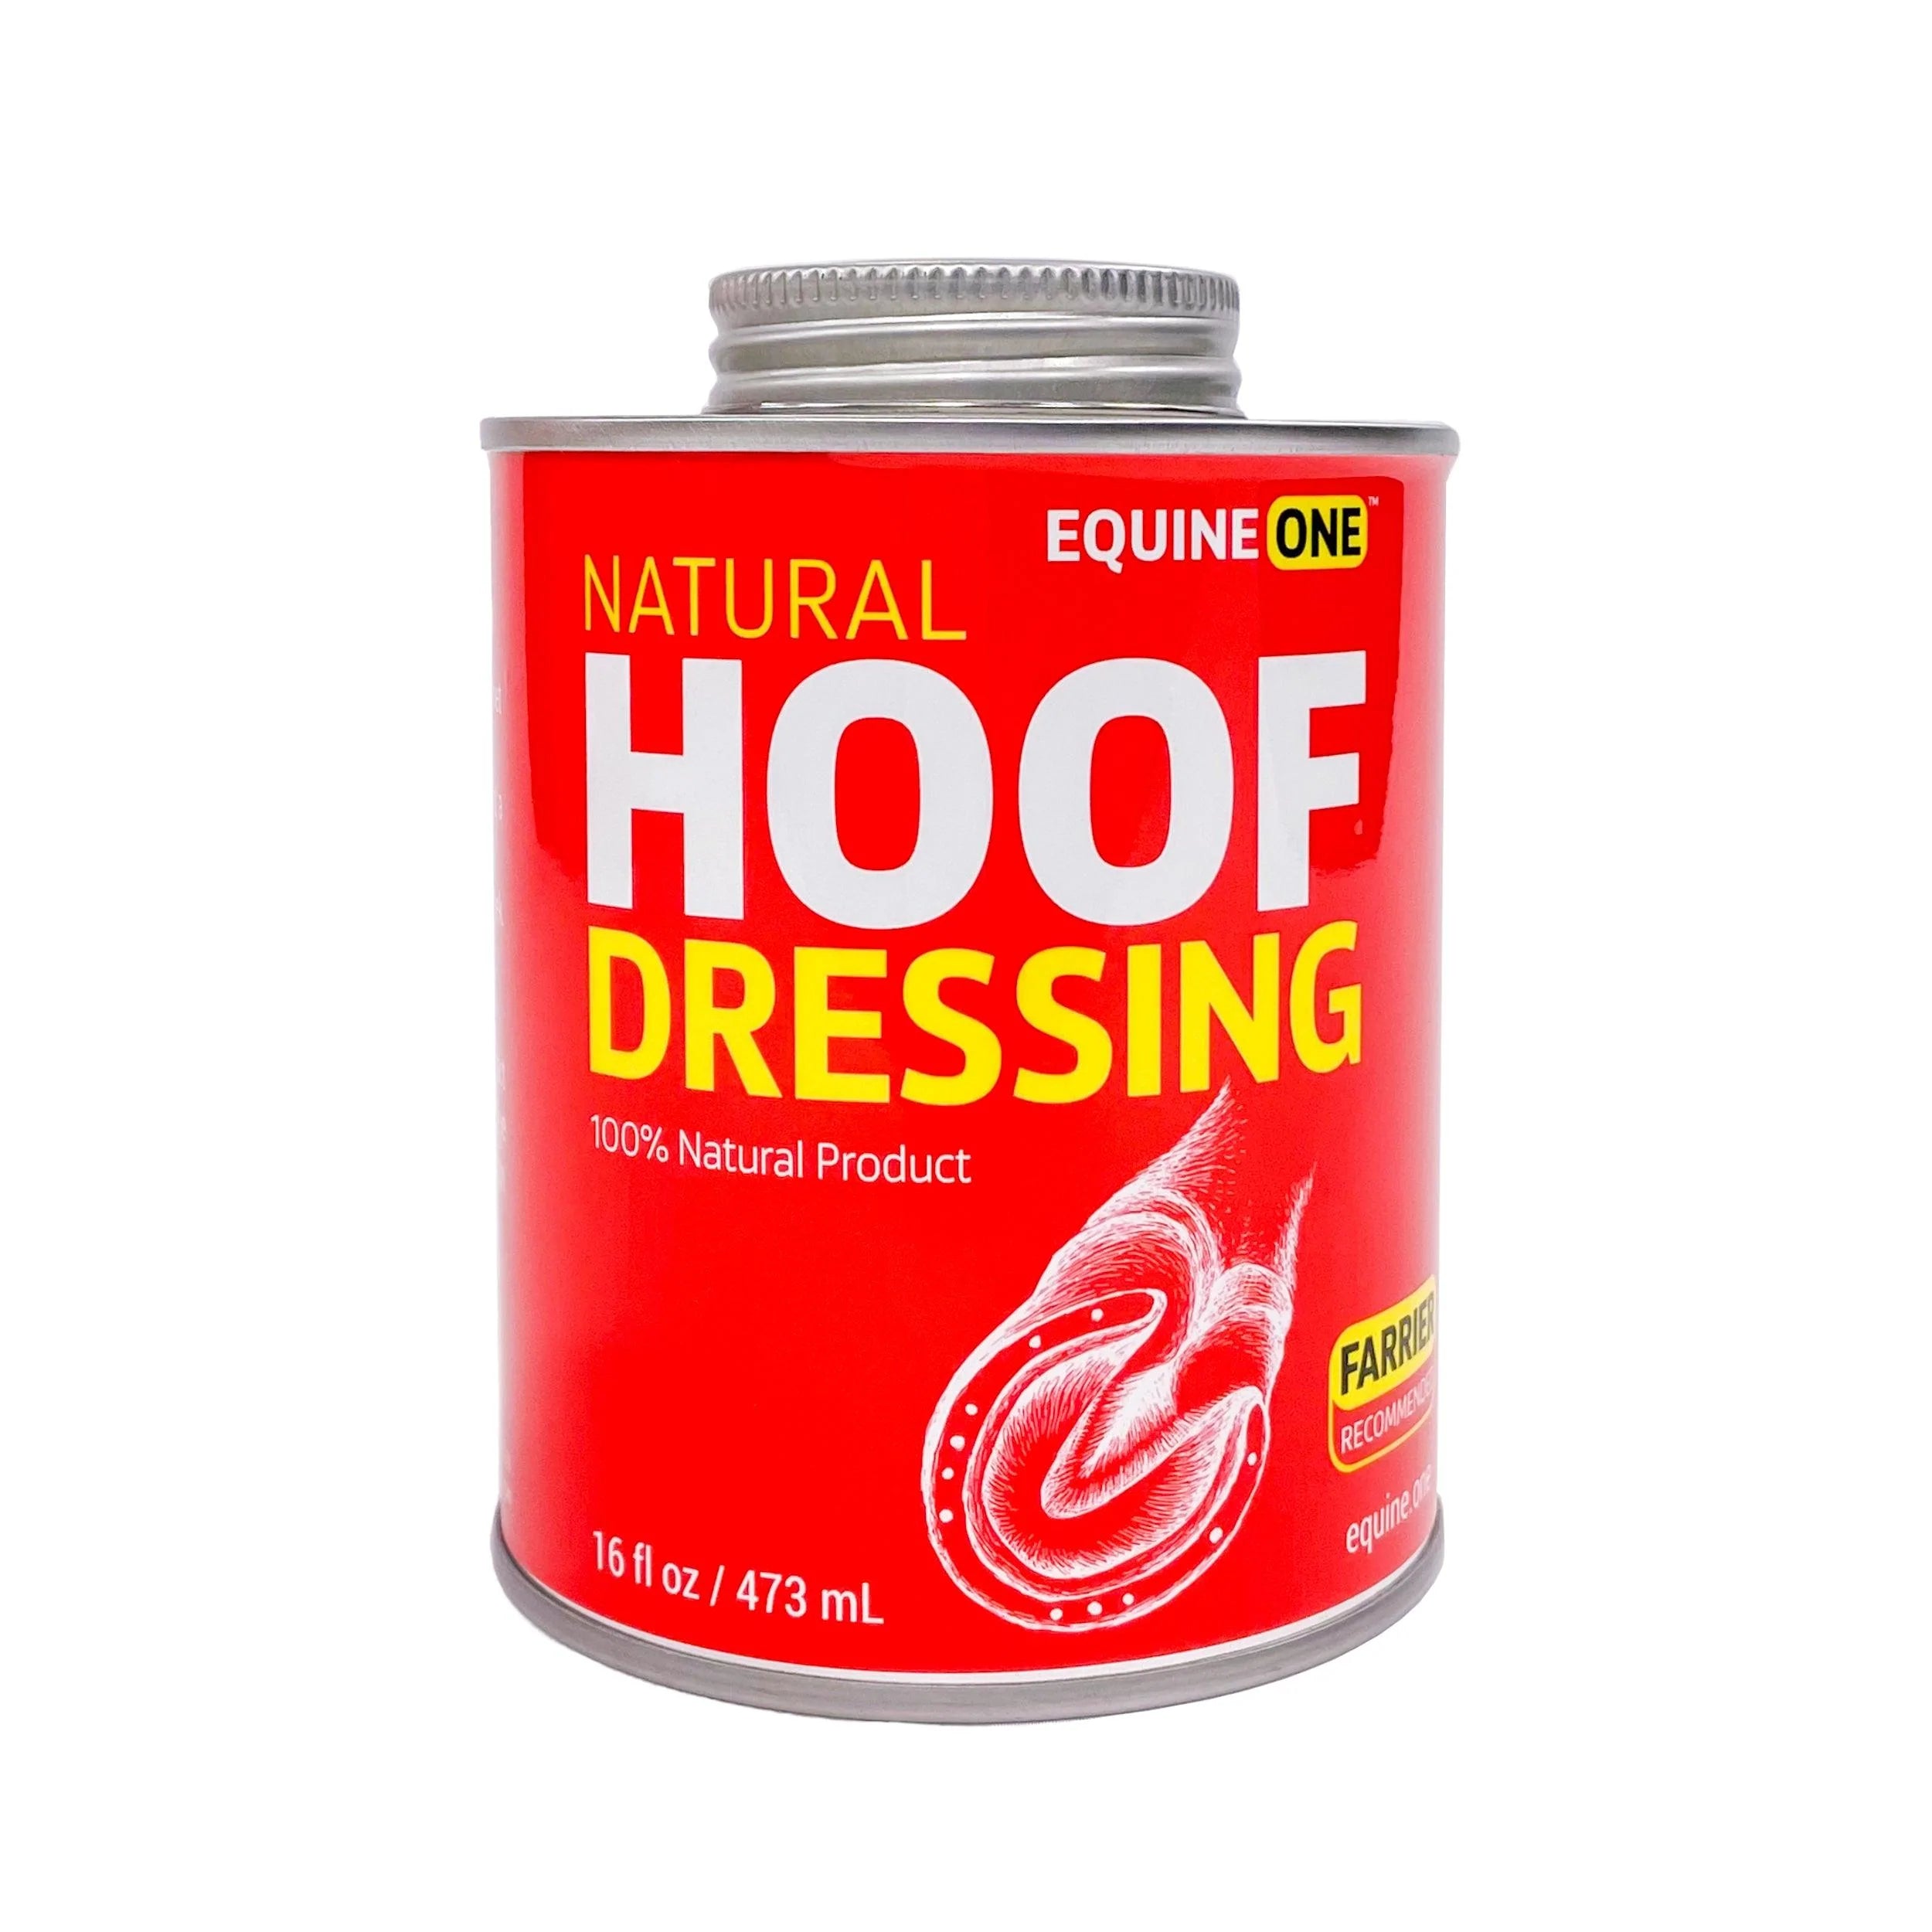 16 fl.oz. Tin Can - Equine One Natural Hoof Dressing - Equine One